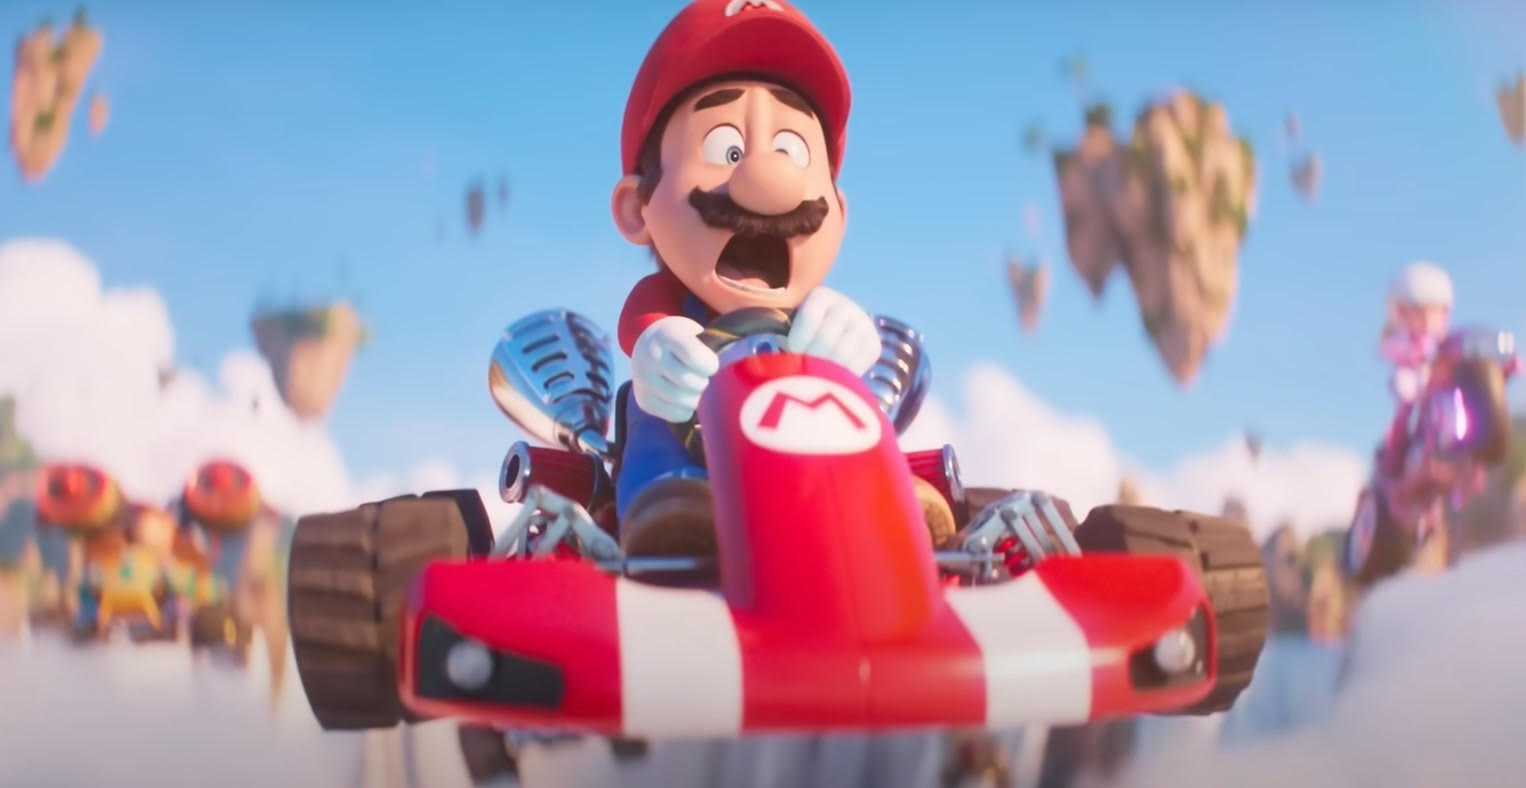 Super Mario Bros. Movie Still #1 at US Box Office, House of Evil Awakens Opens with $23 Million